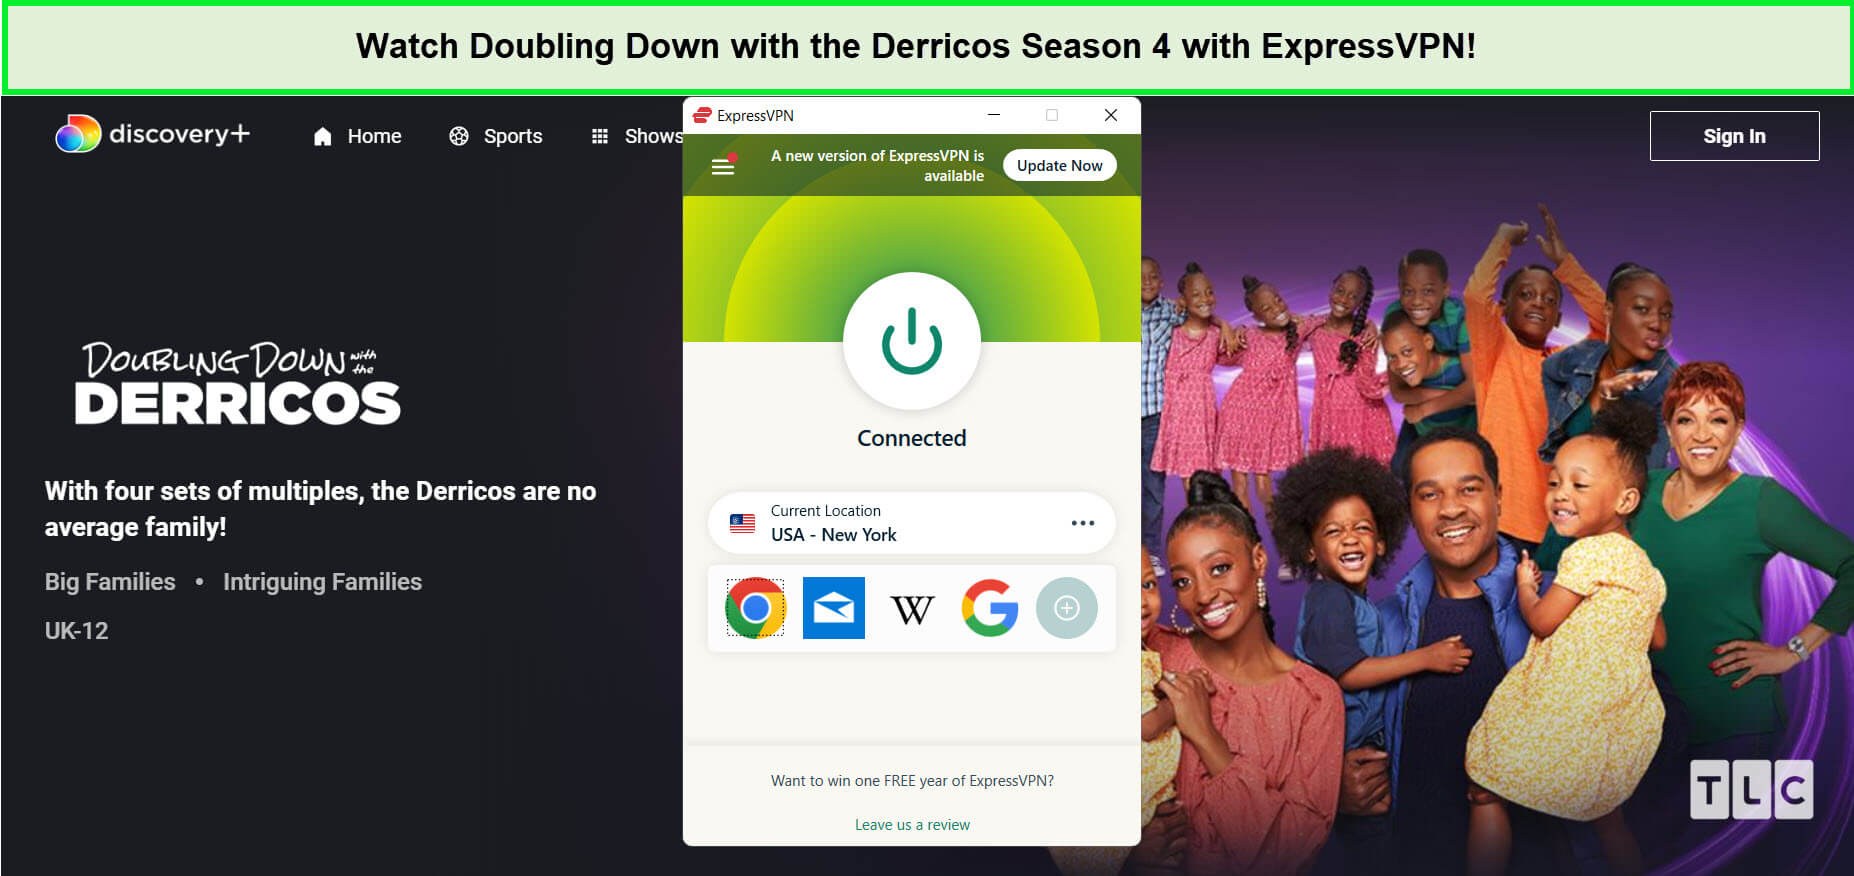 expressvpn-unblocks-doubling-down-with-the-derricos-season-four-on-discovery-plus-in-Spain